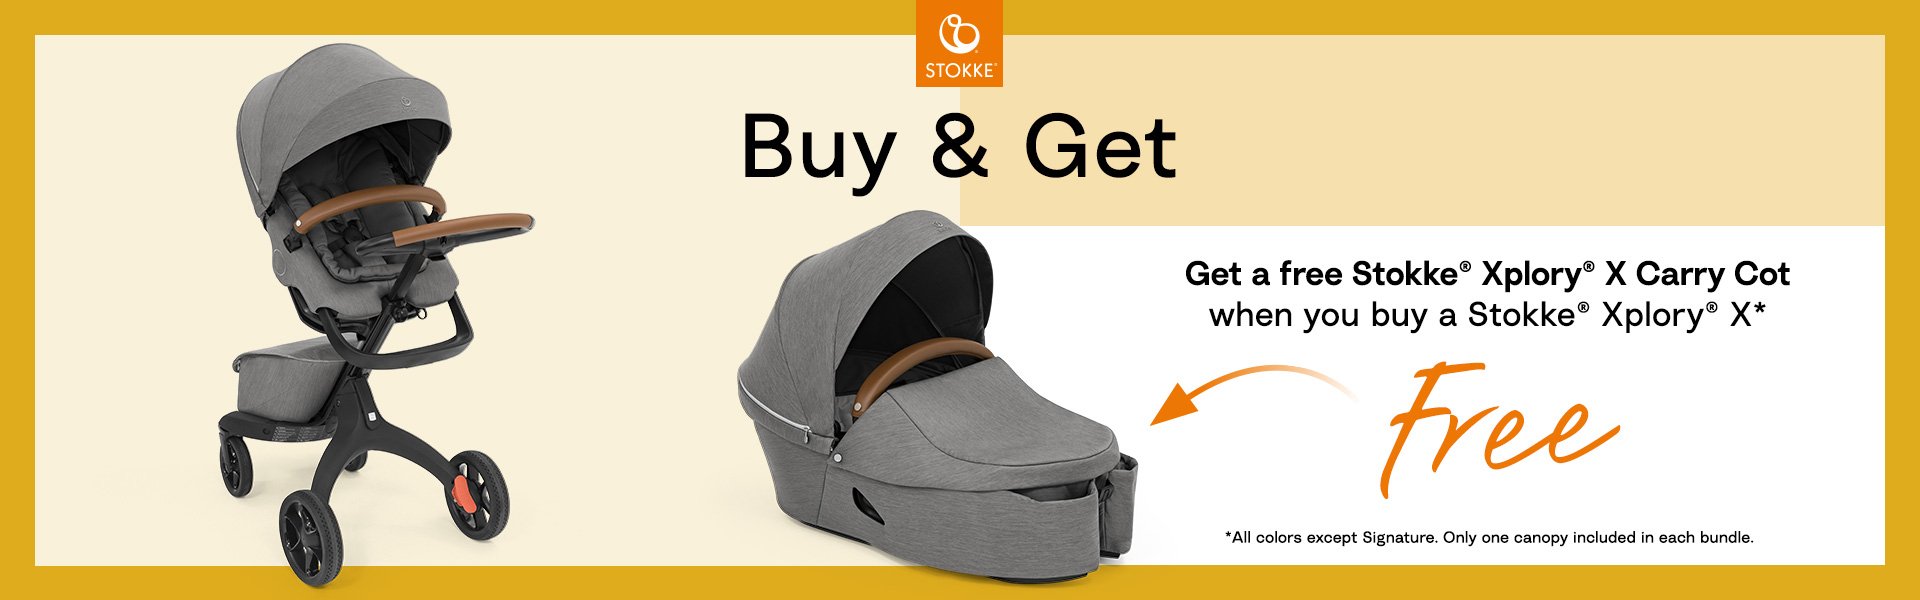 Xplory Free Carrycot offer